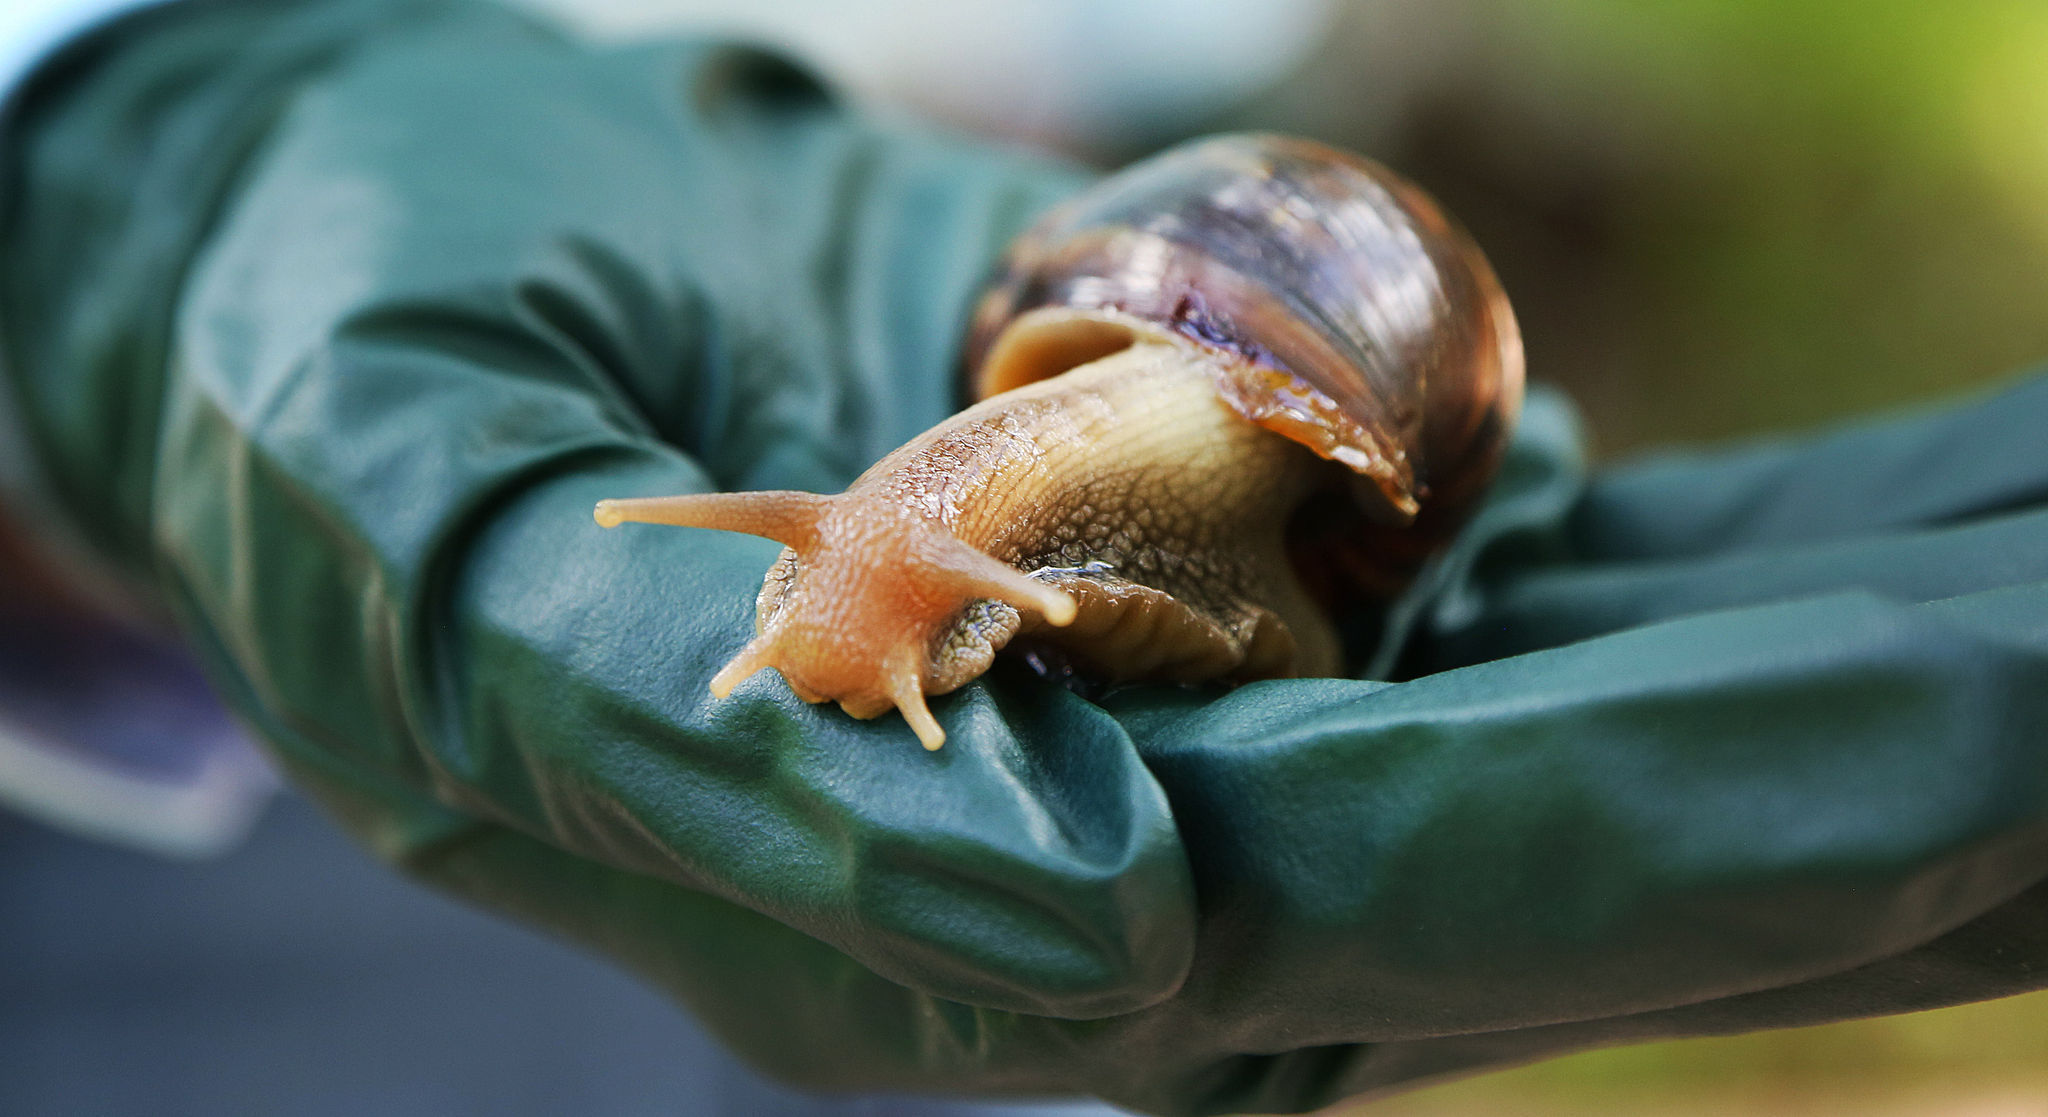 Infestation of giant African land snails in Davie appears to be ...